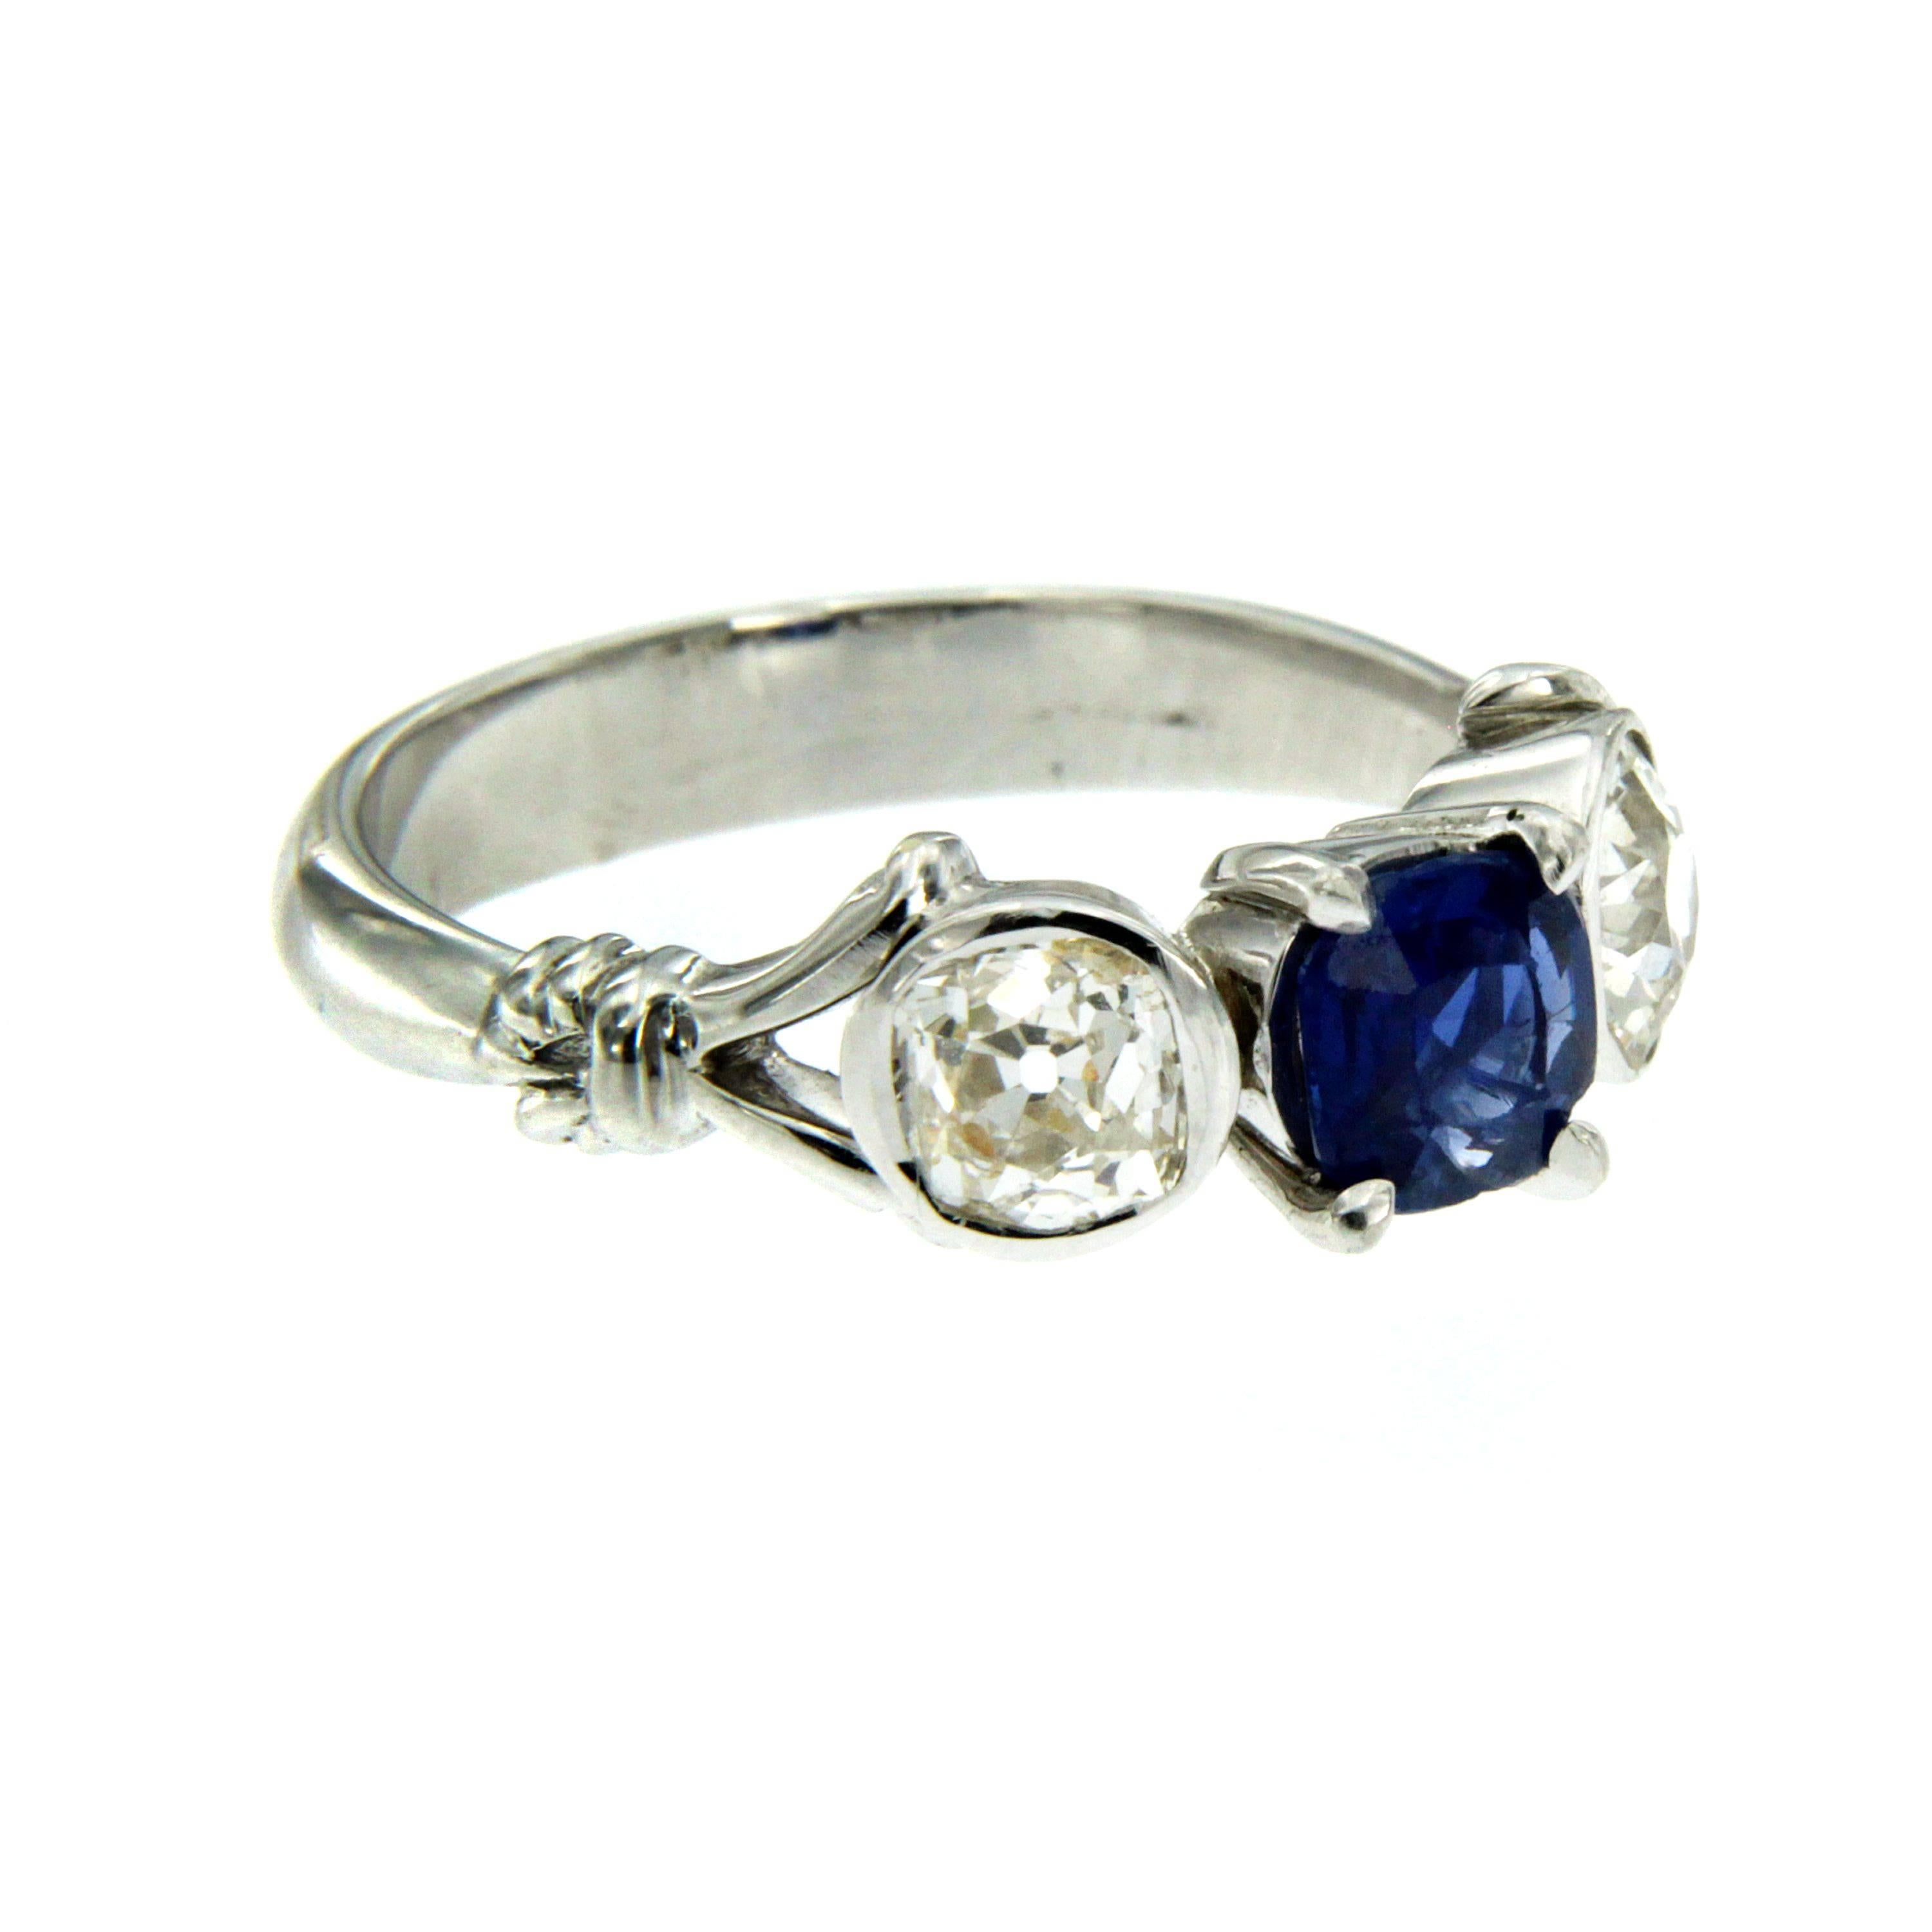 Classic three stone 18k Gold ring set with an oval cut  Ceylon Sapphire weighing approx. 0.90 carats and 2 old cut diamonds with a total weight of approx. 0.80 carats I color Vs clarity. The Sapphire is no heated.

CONDITION: Pre-Owned -